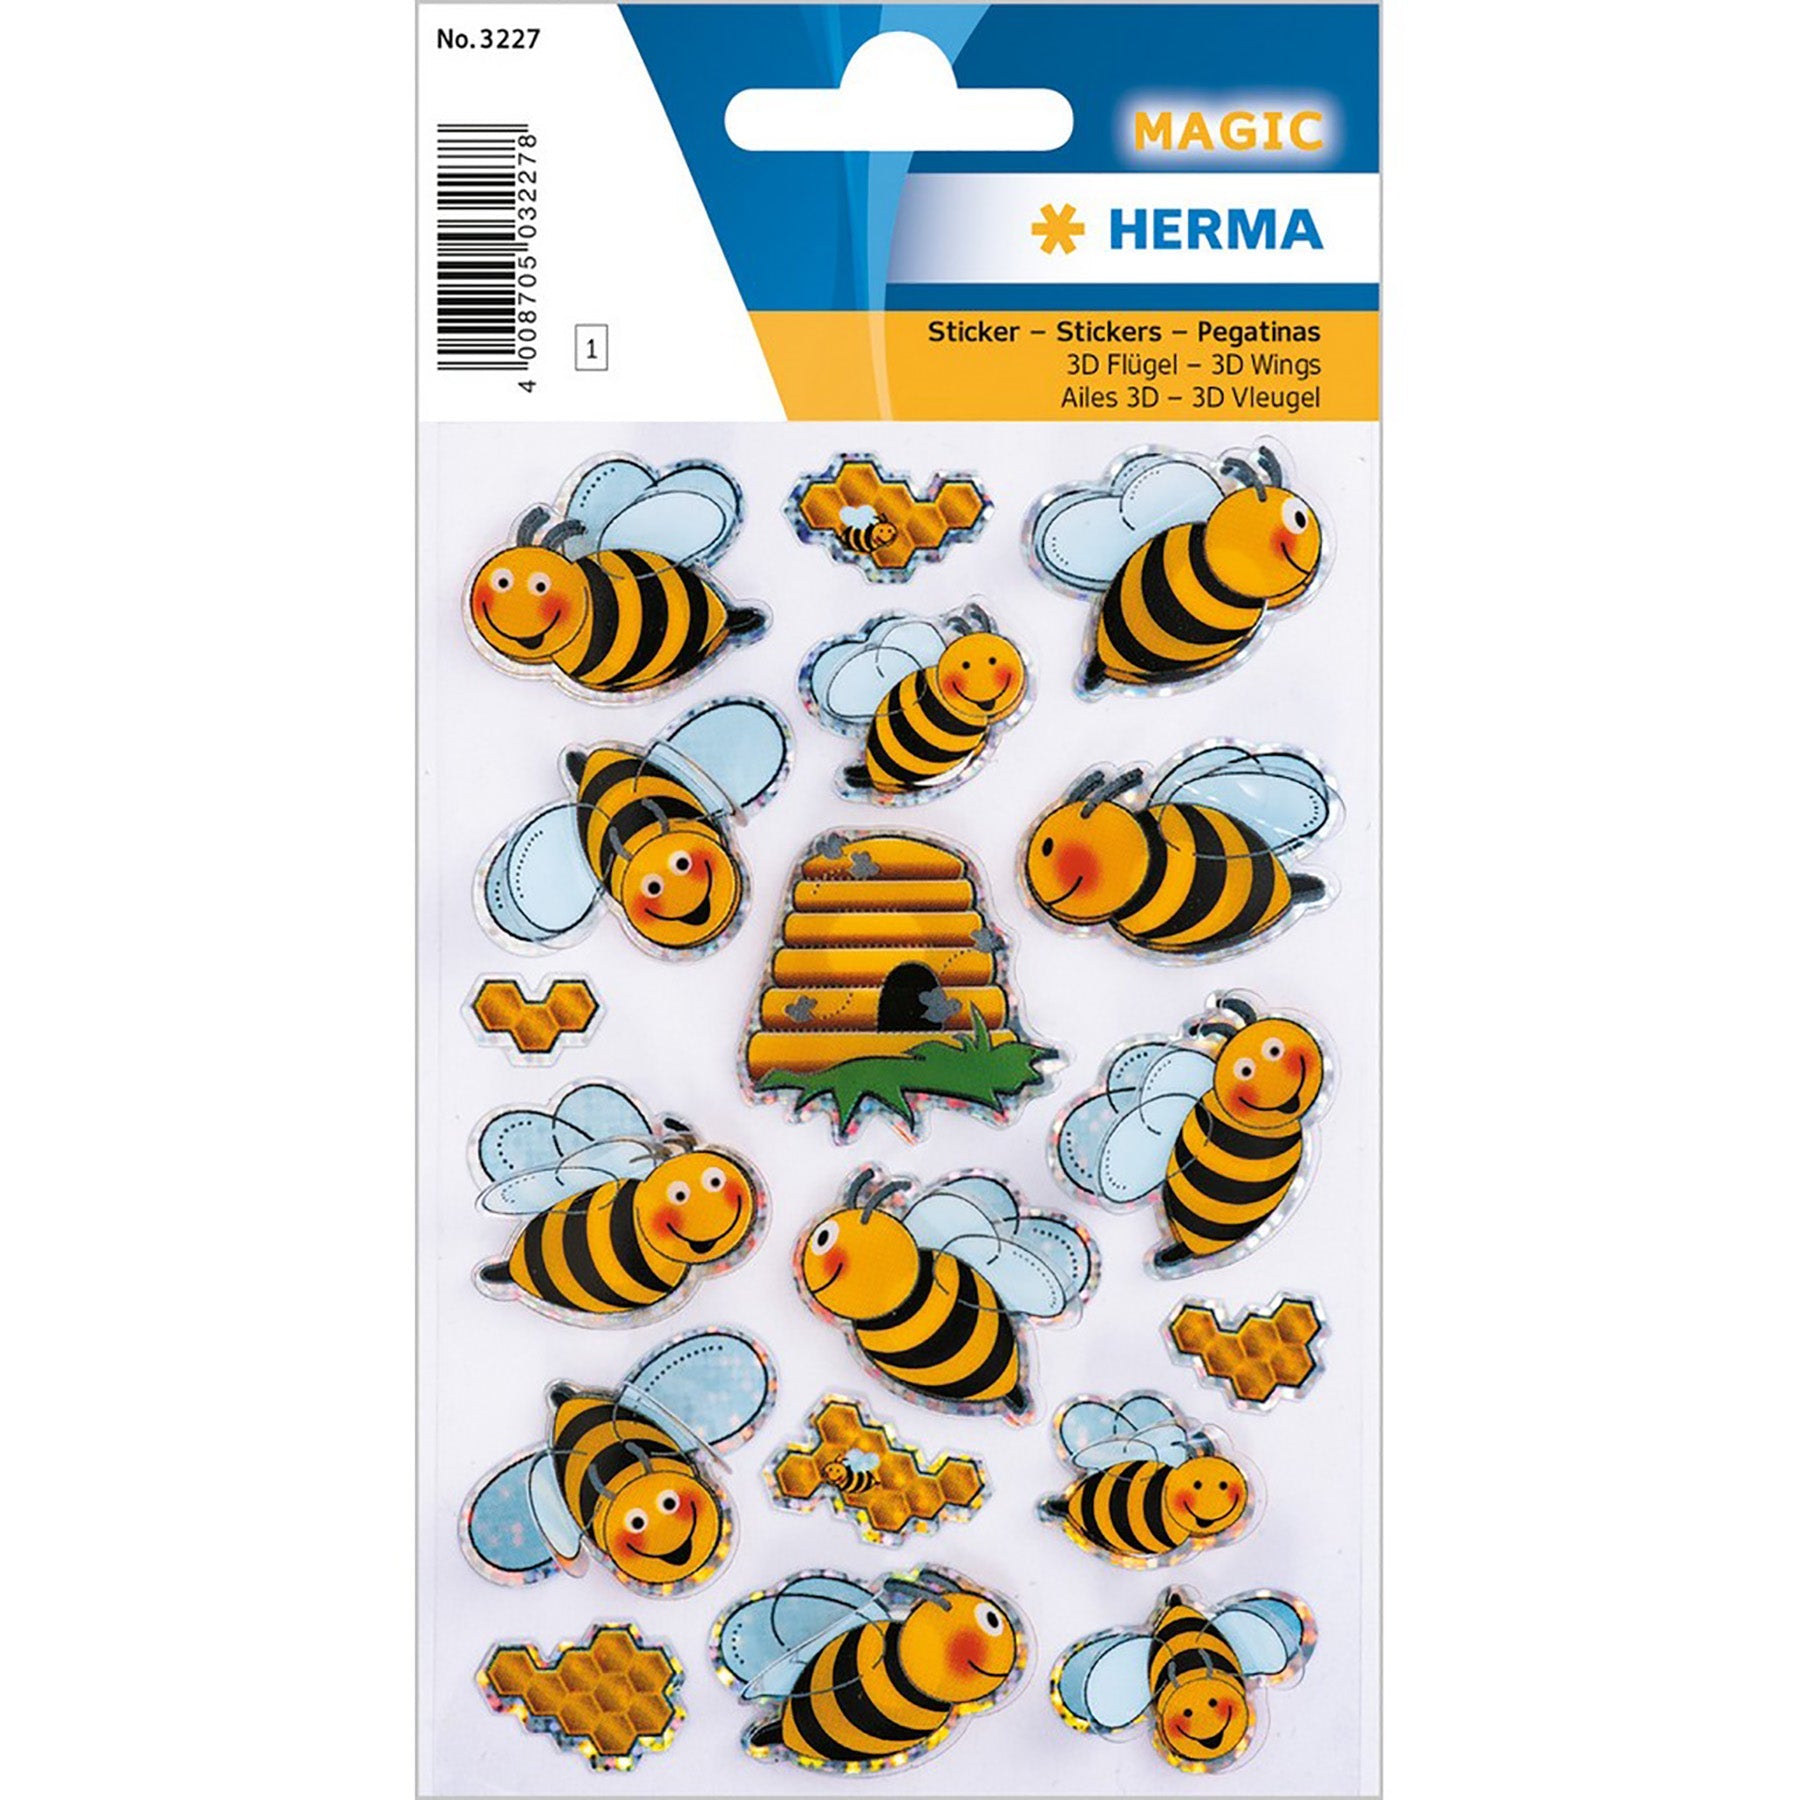 Herma Magic Stickers Bees 3D Wings 4.75x3.1in Sheet